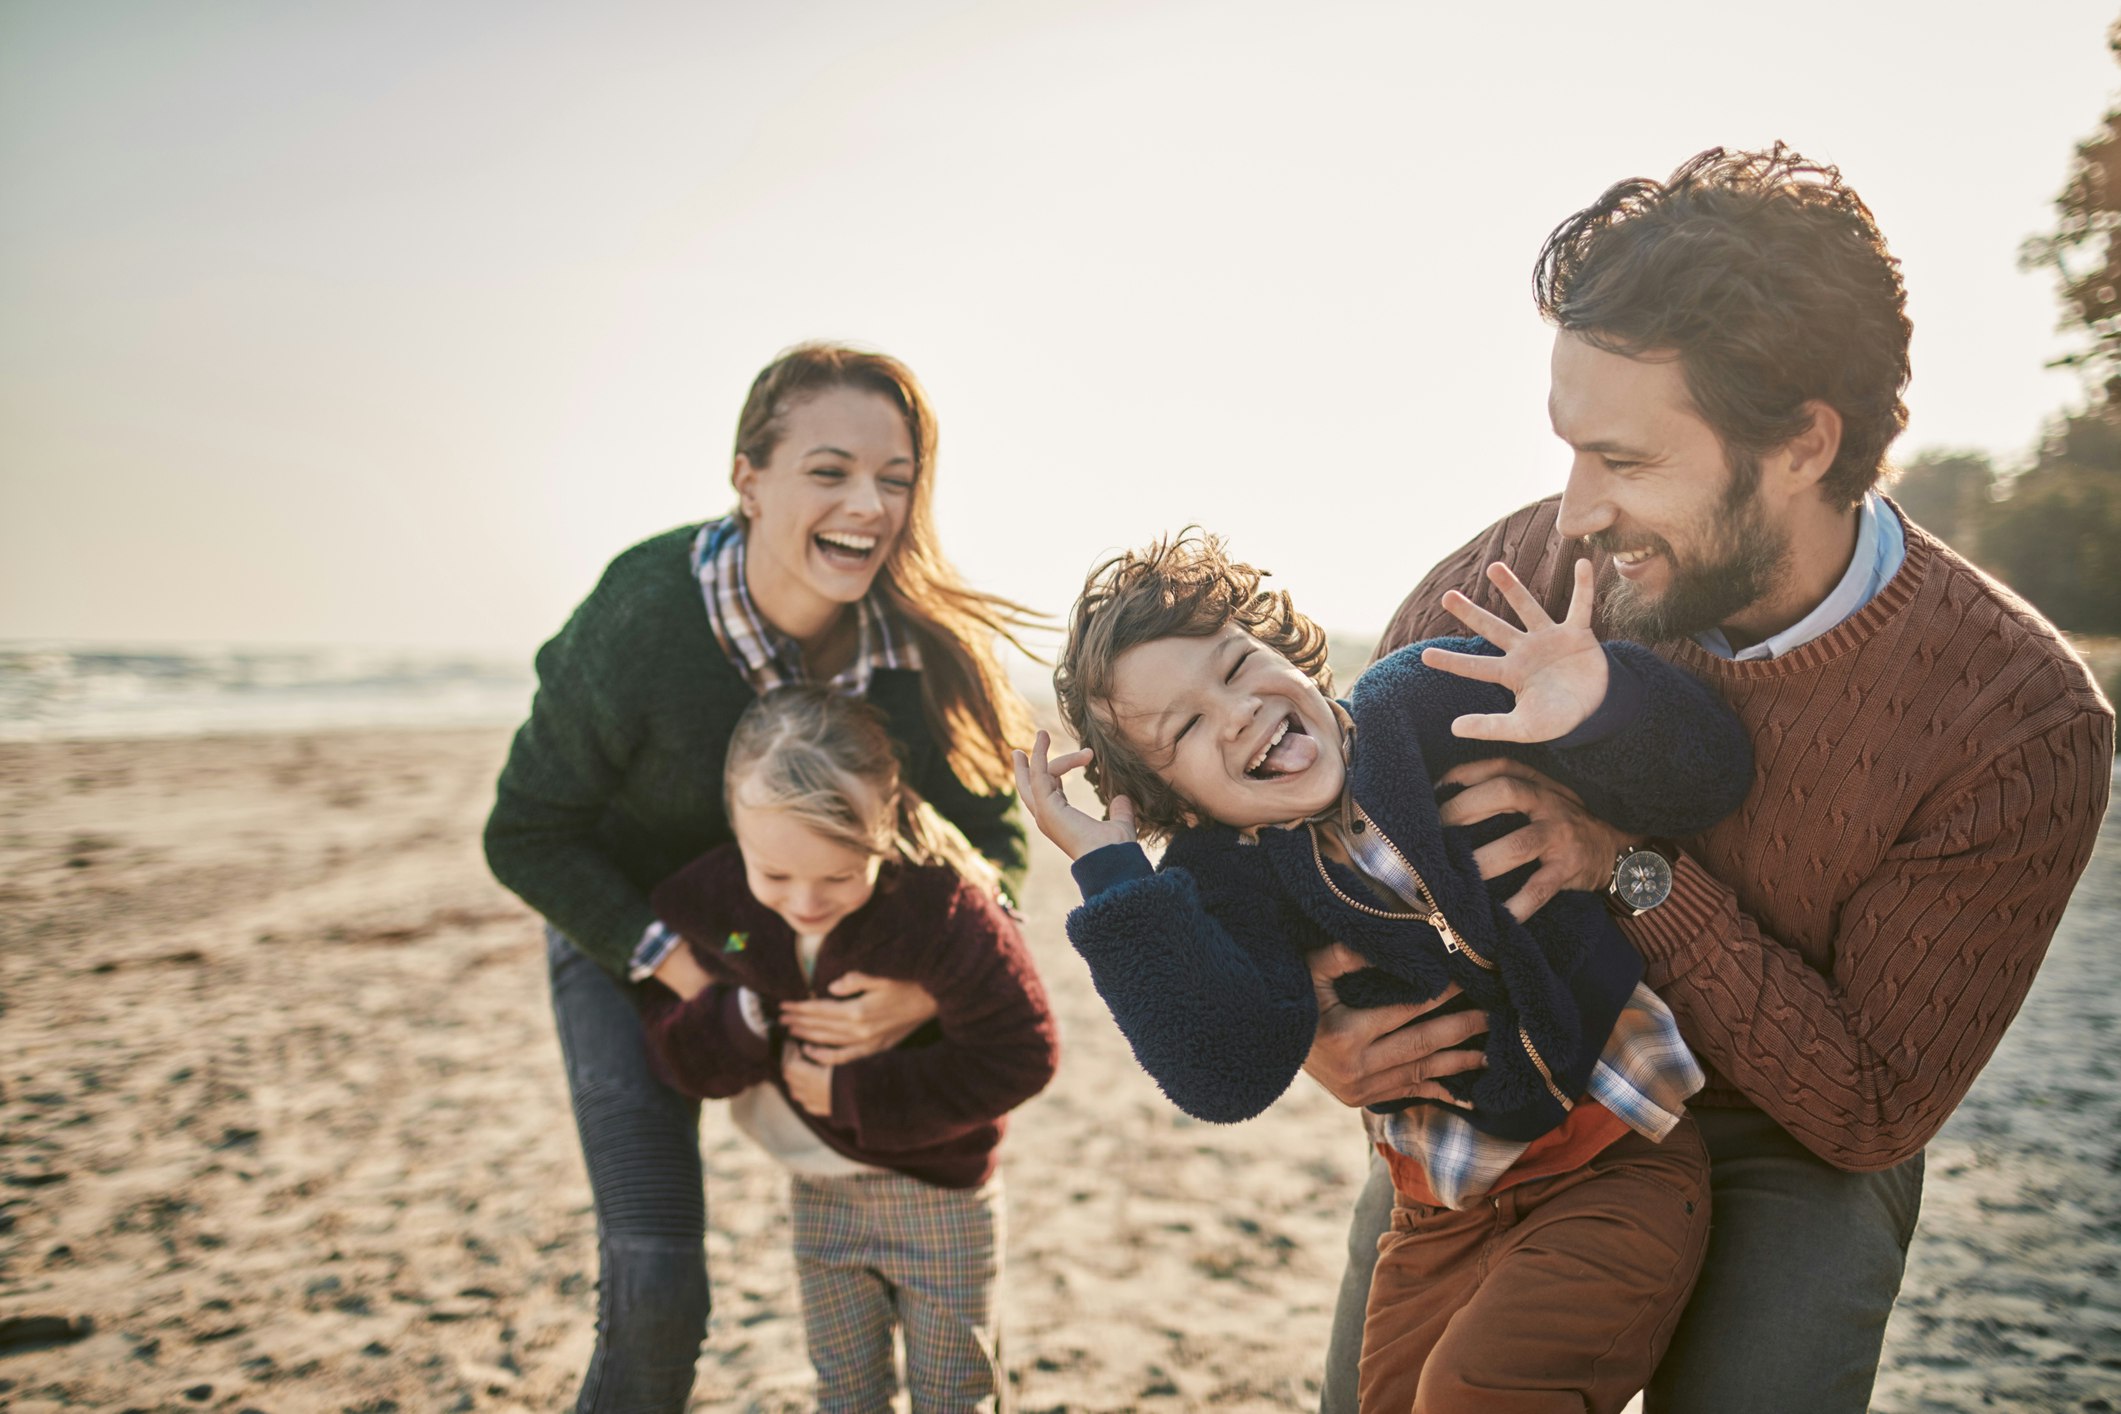 A white family laugh and play on the beach together